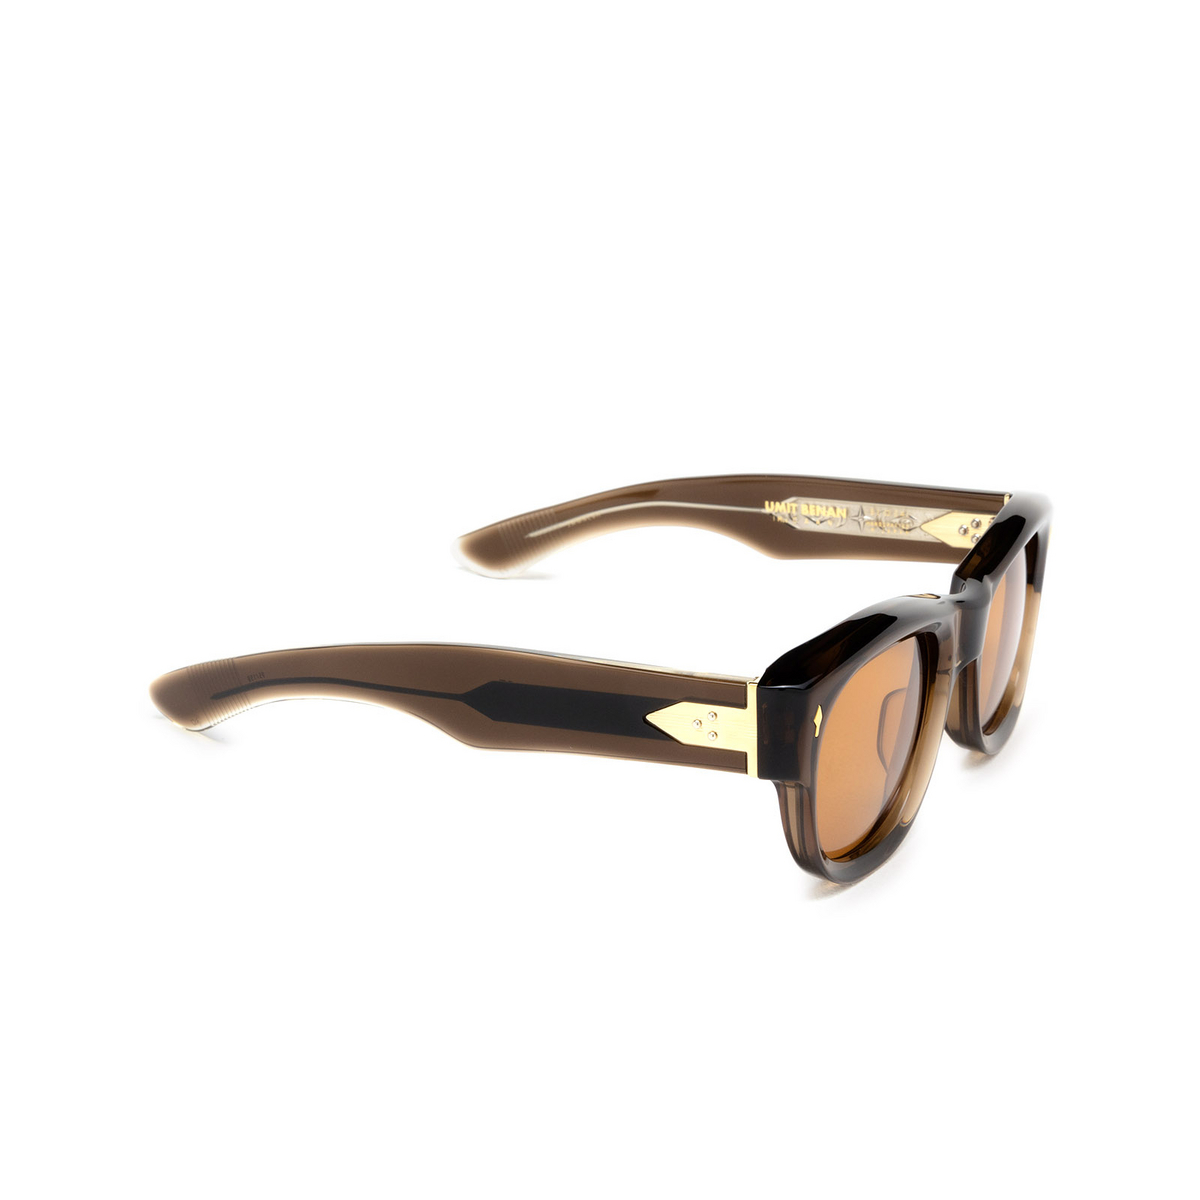 Jacques Marie Mage CAAN Sunglasses LONDON - three-quarters view